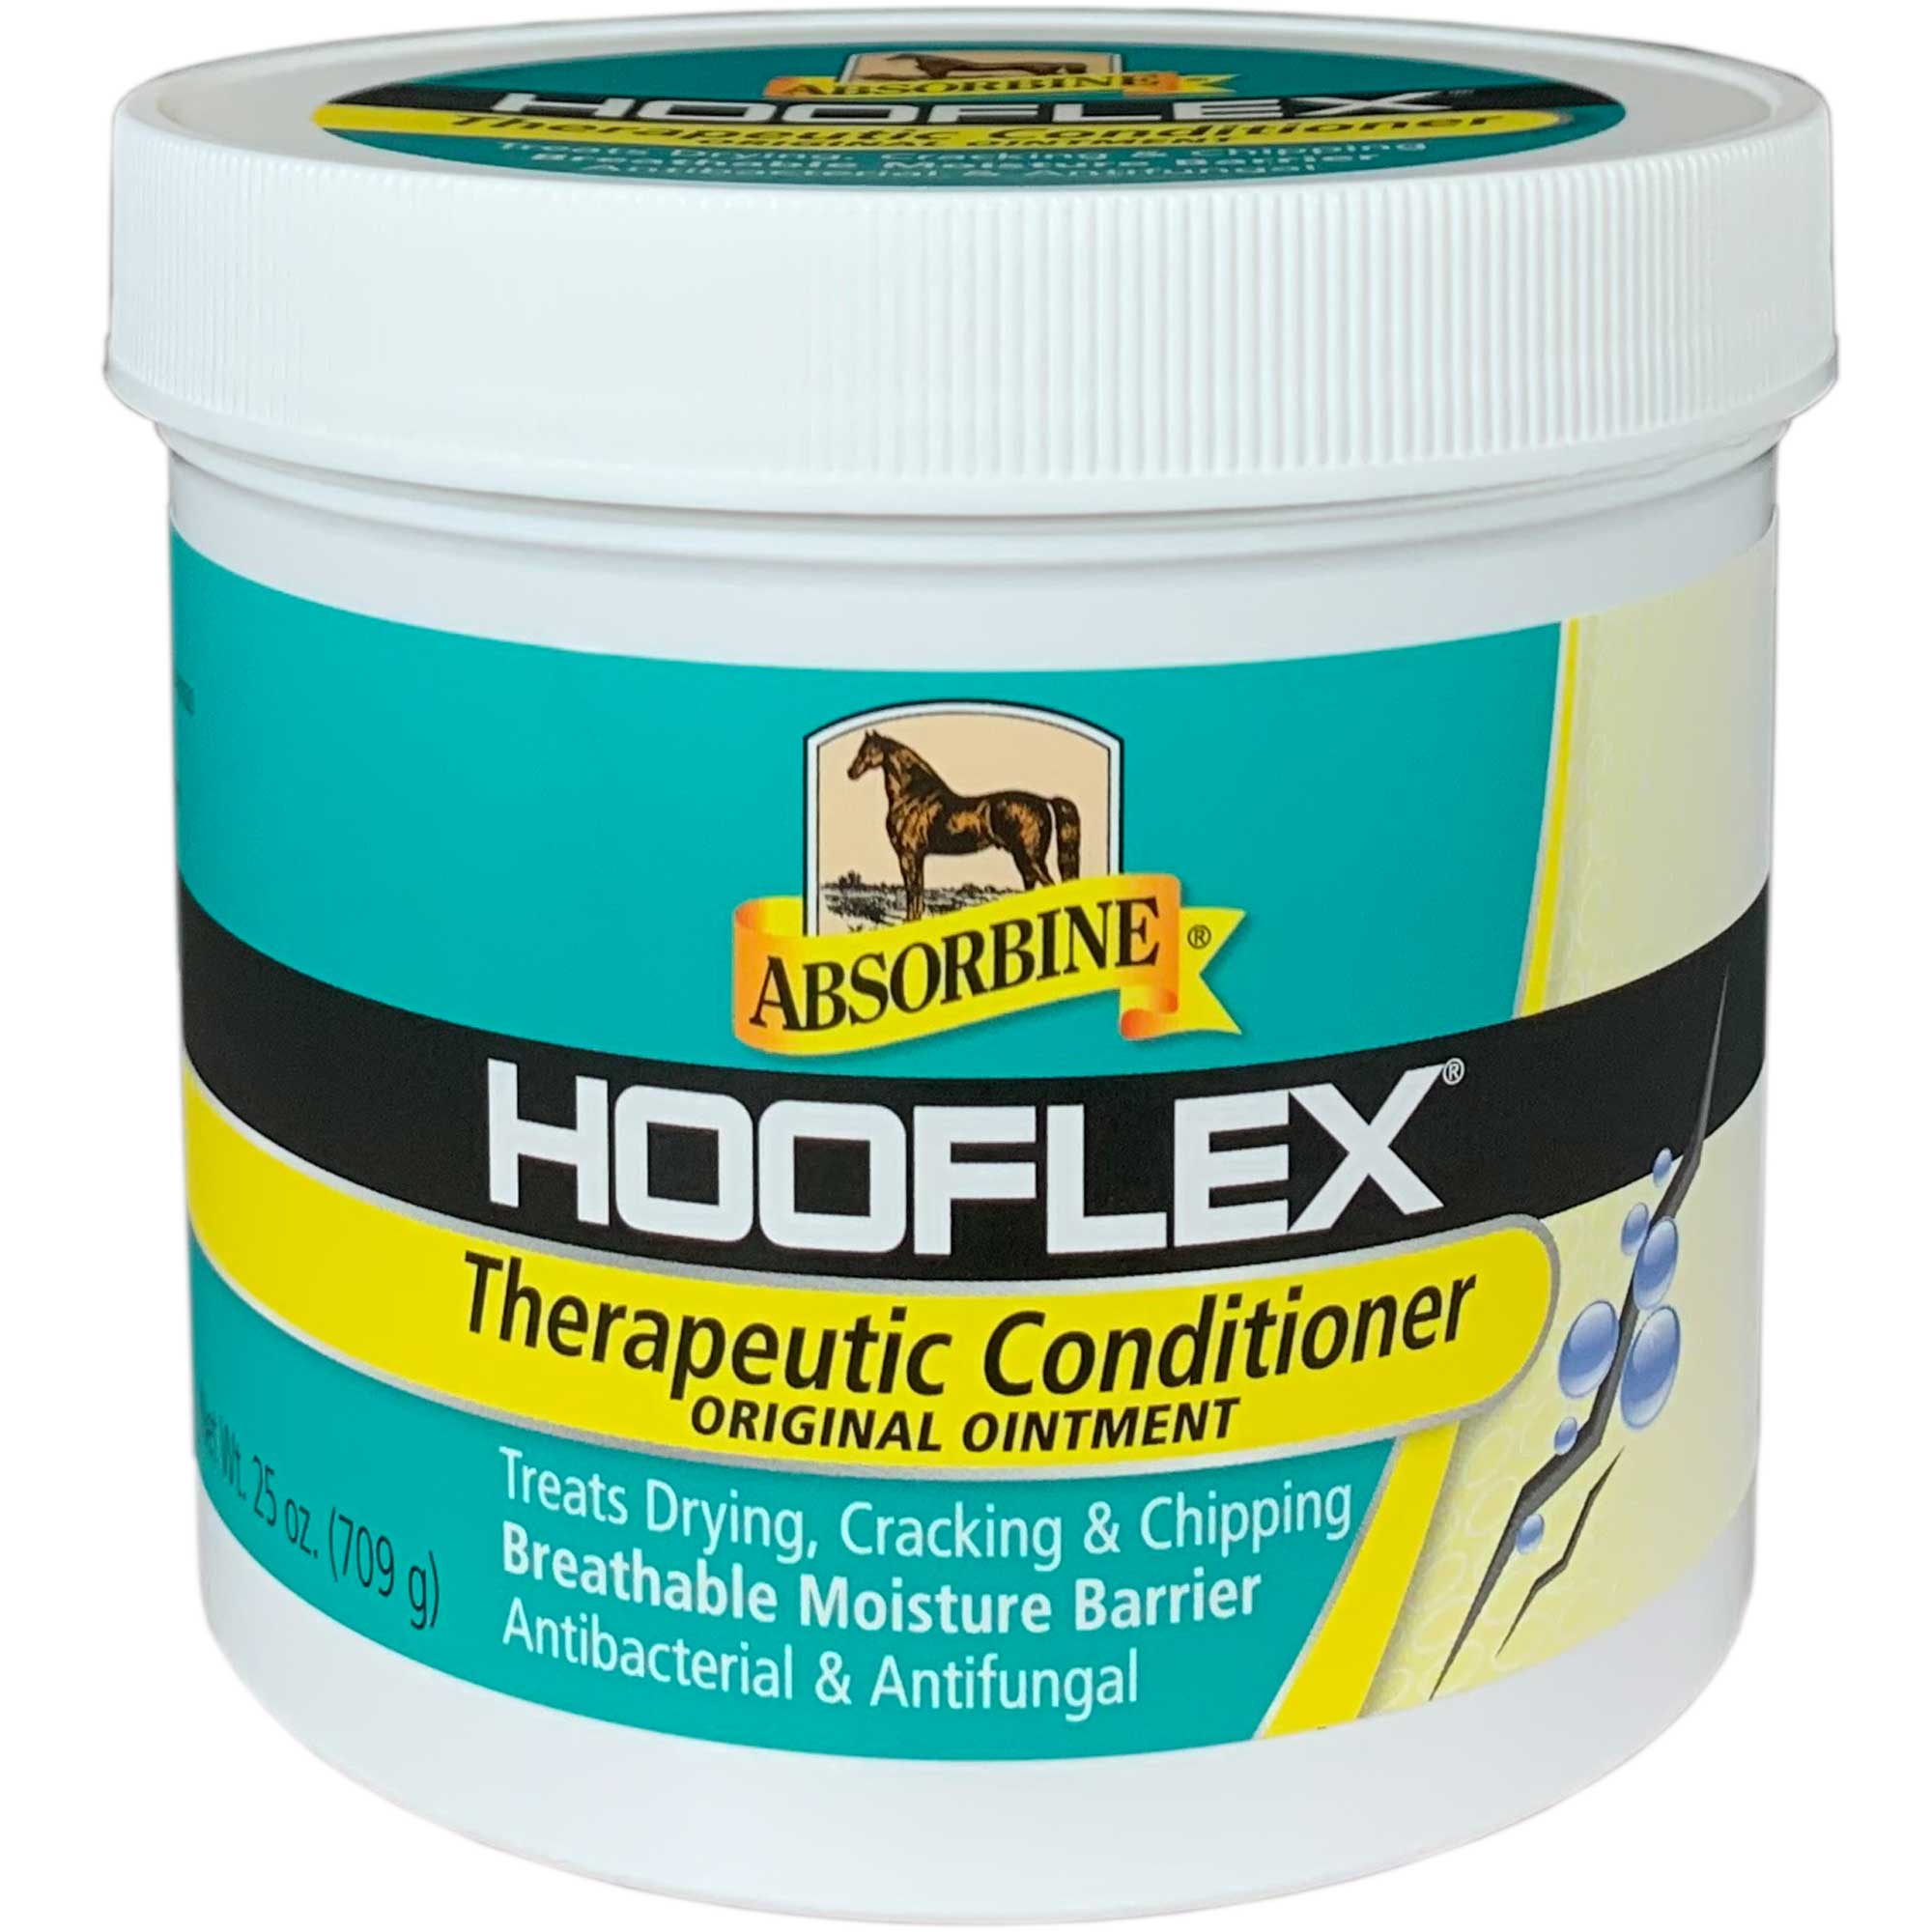 Absorbine Hooflex Therapeutic Conditioner Ointment Usage